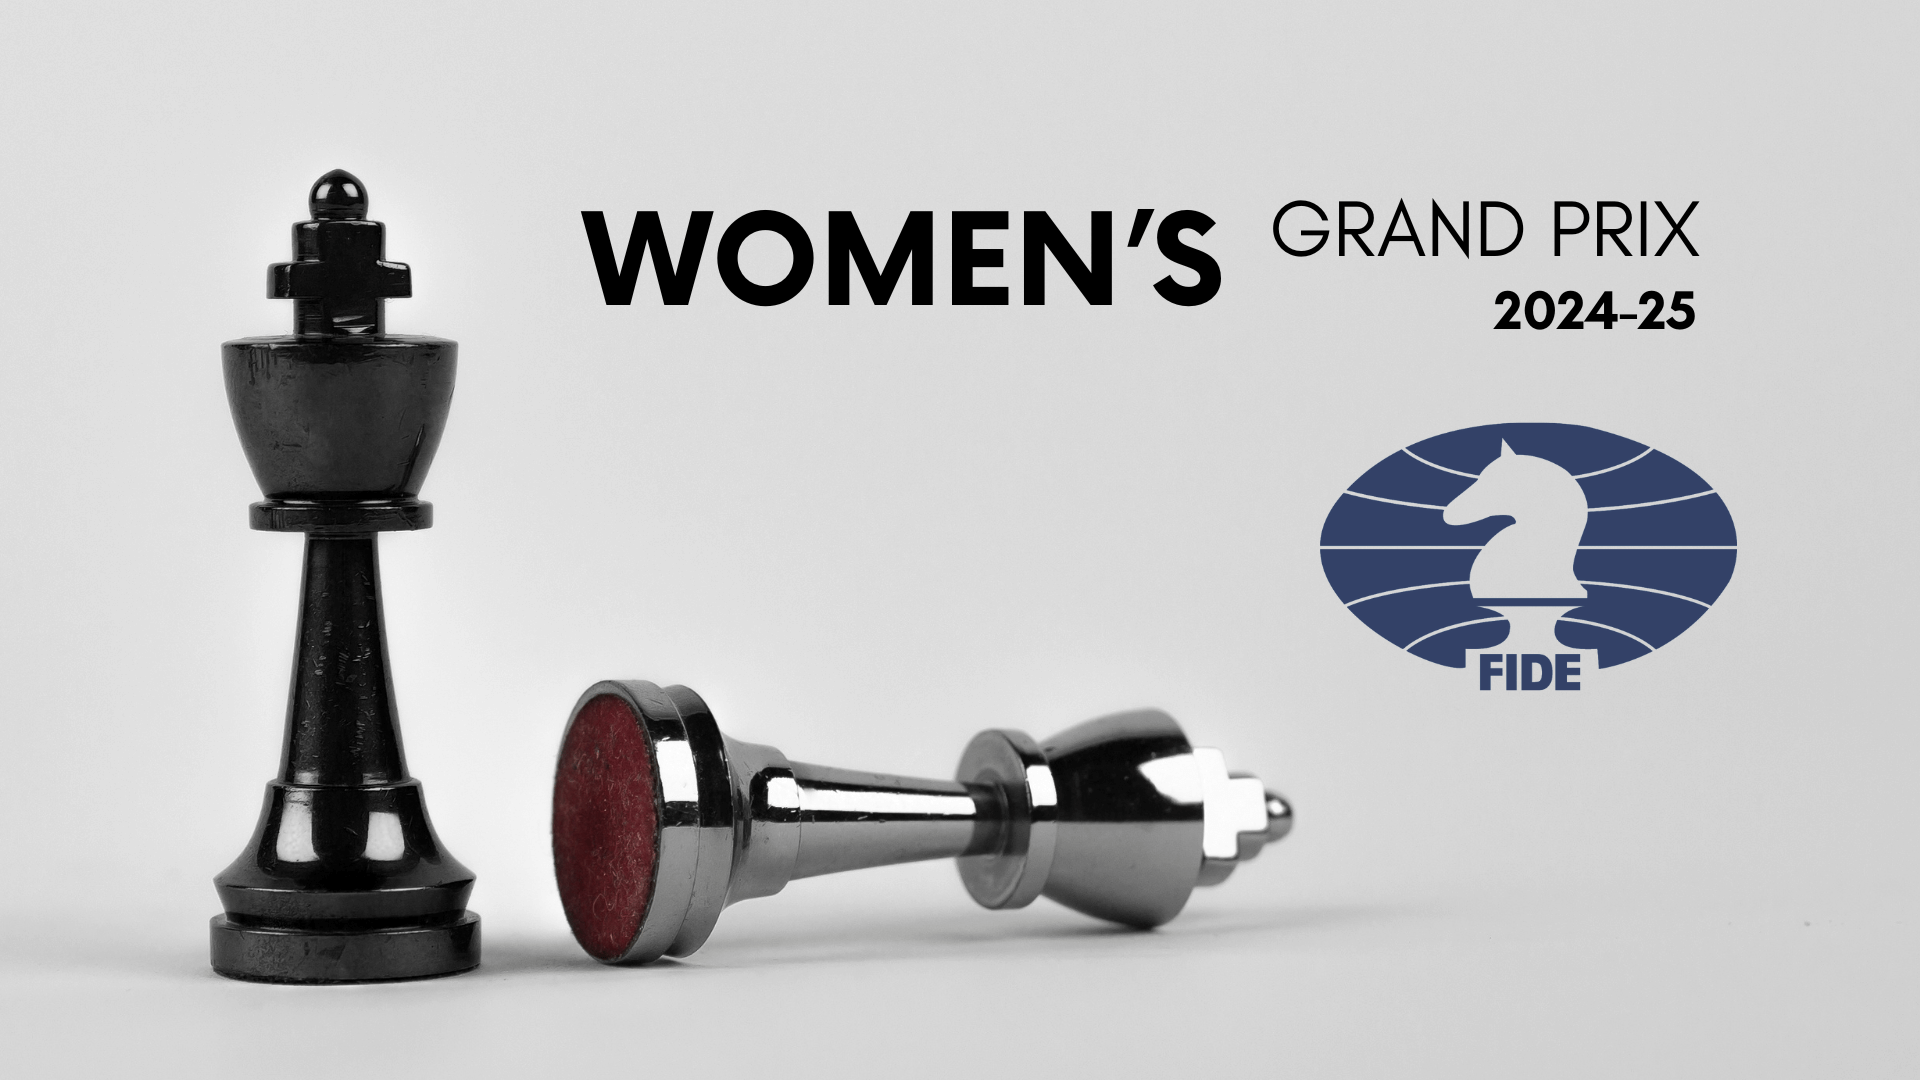 Exciting Developments in Women's Chess: A Comprehensive Look at the 2024 Women's Grand Prix Series